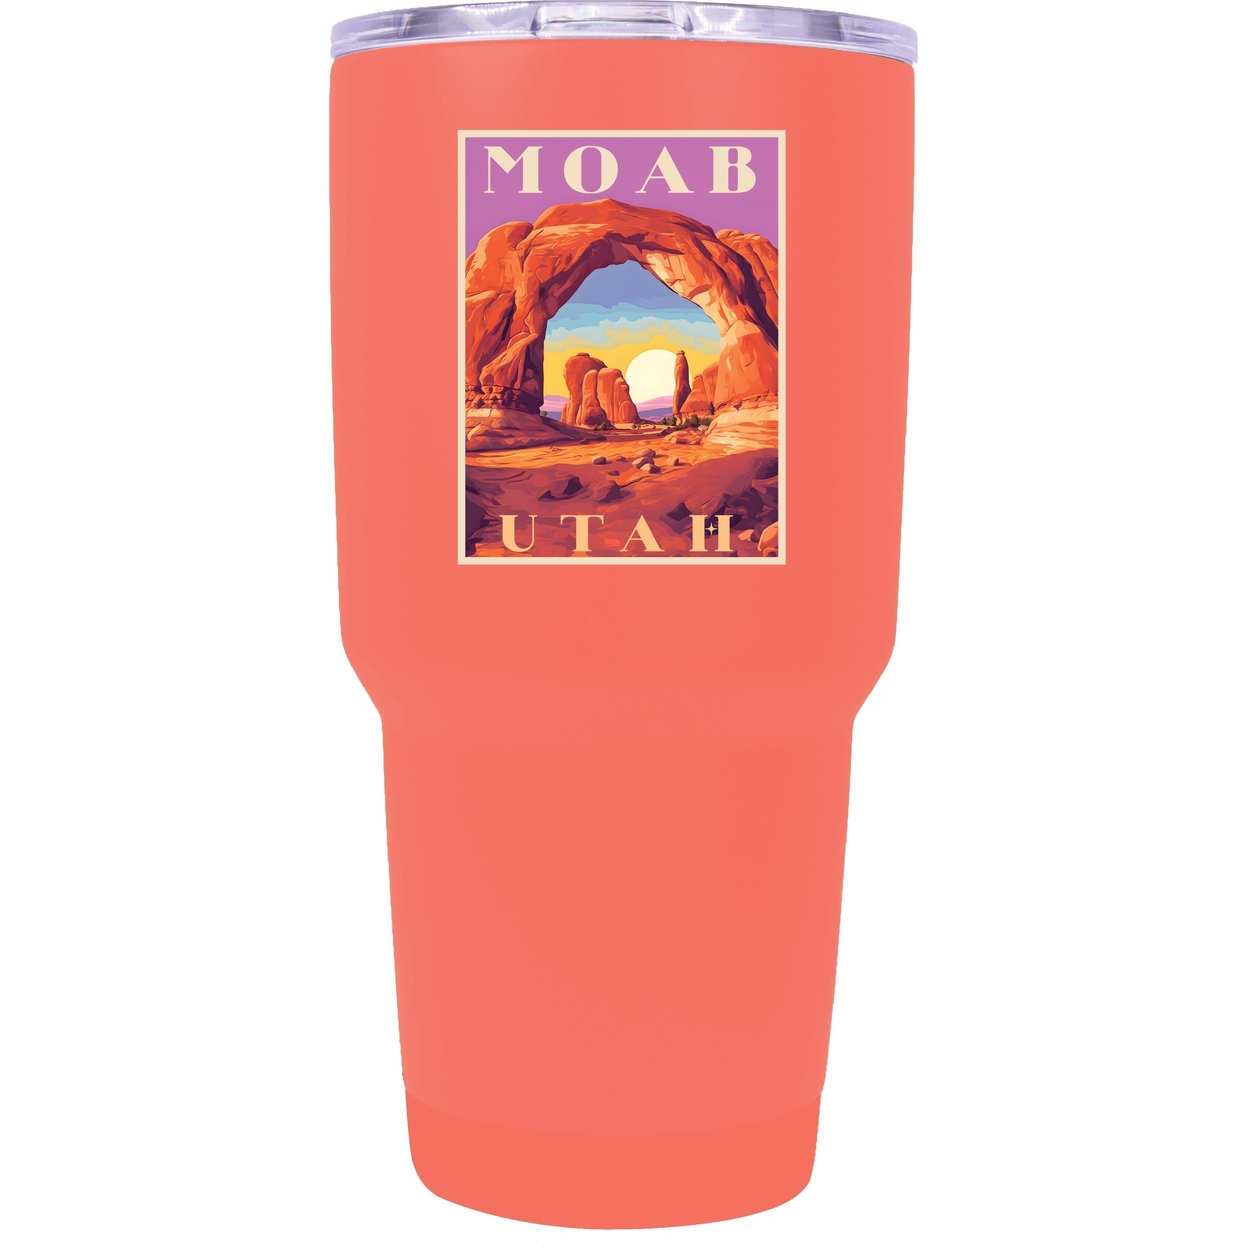 Moab Utah Souvenir 24 Oz Insulated Stainless Steel Tumbler - Coral,,Single